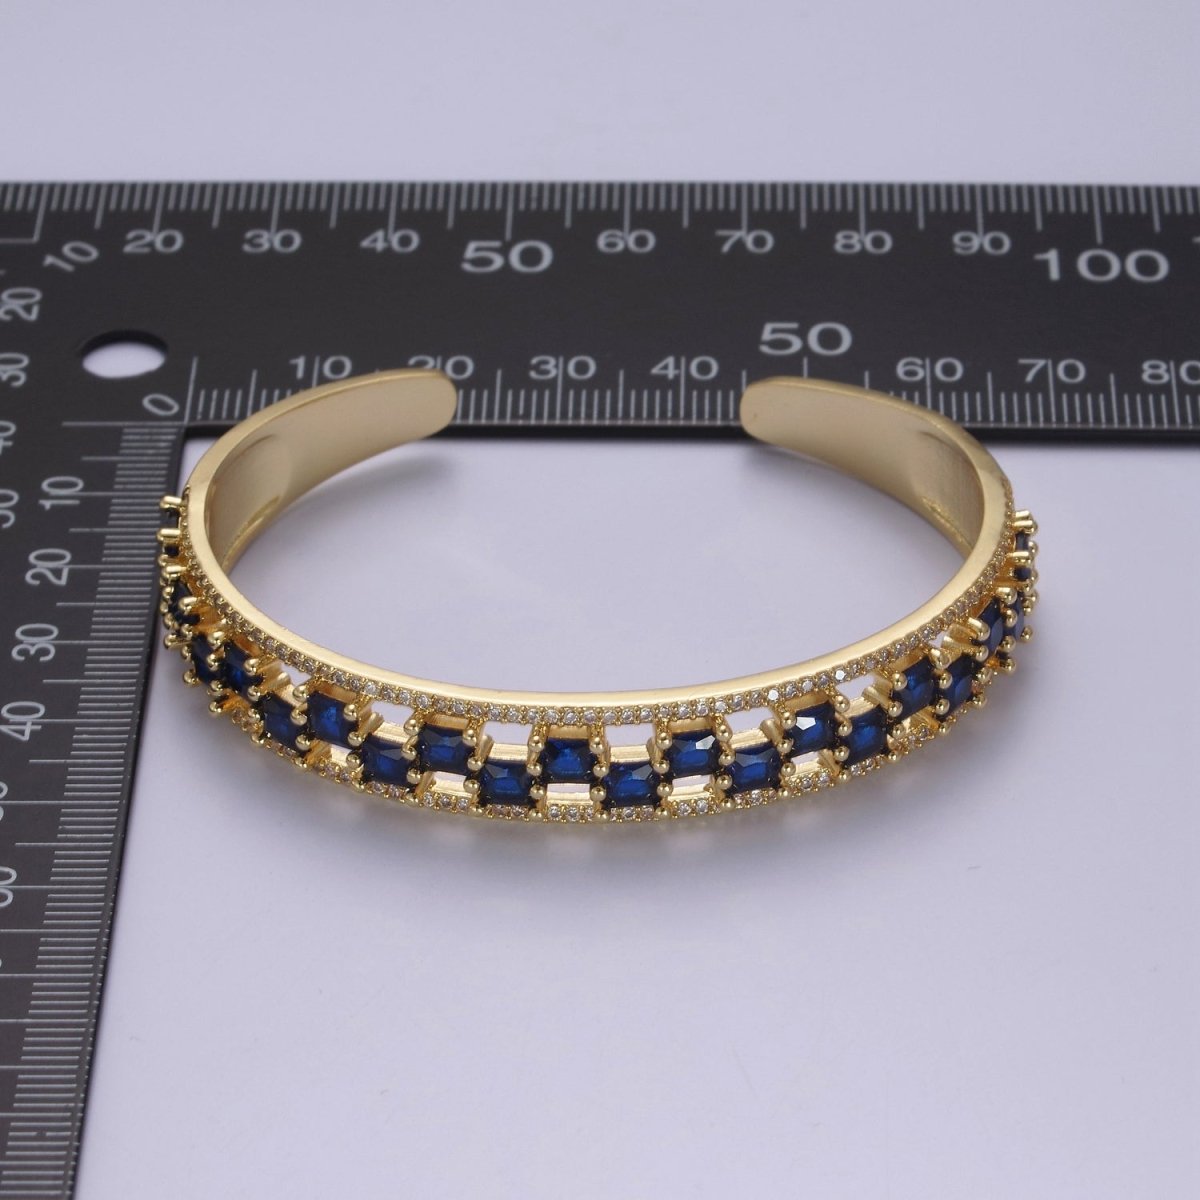 Gold CZ Diamond bangles studded with Clear White, Fuchsia Blue, Green stones | New fashion designer bangles | CZ Diamond bangles Bracelet | WA-780 to WA-783 Clearance Pricing - DLUXCA